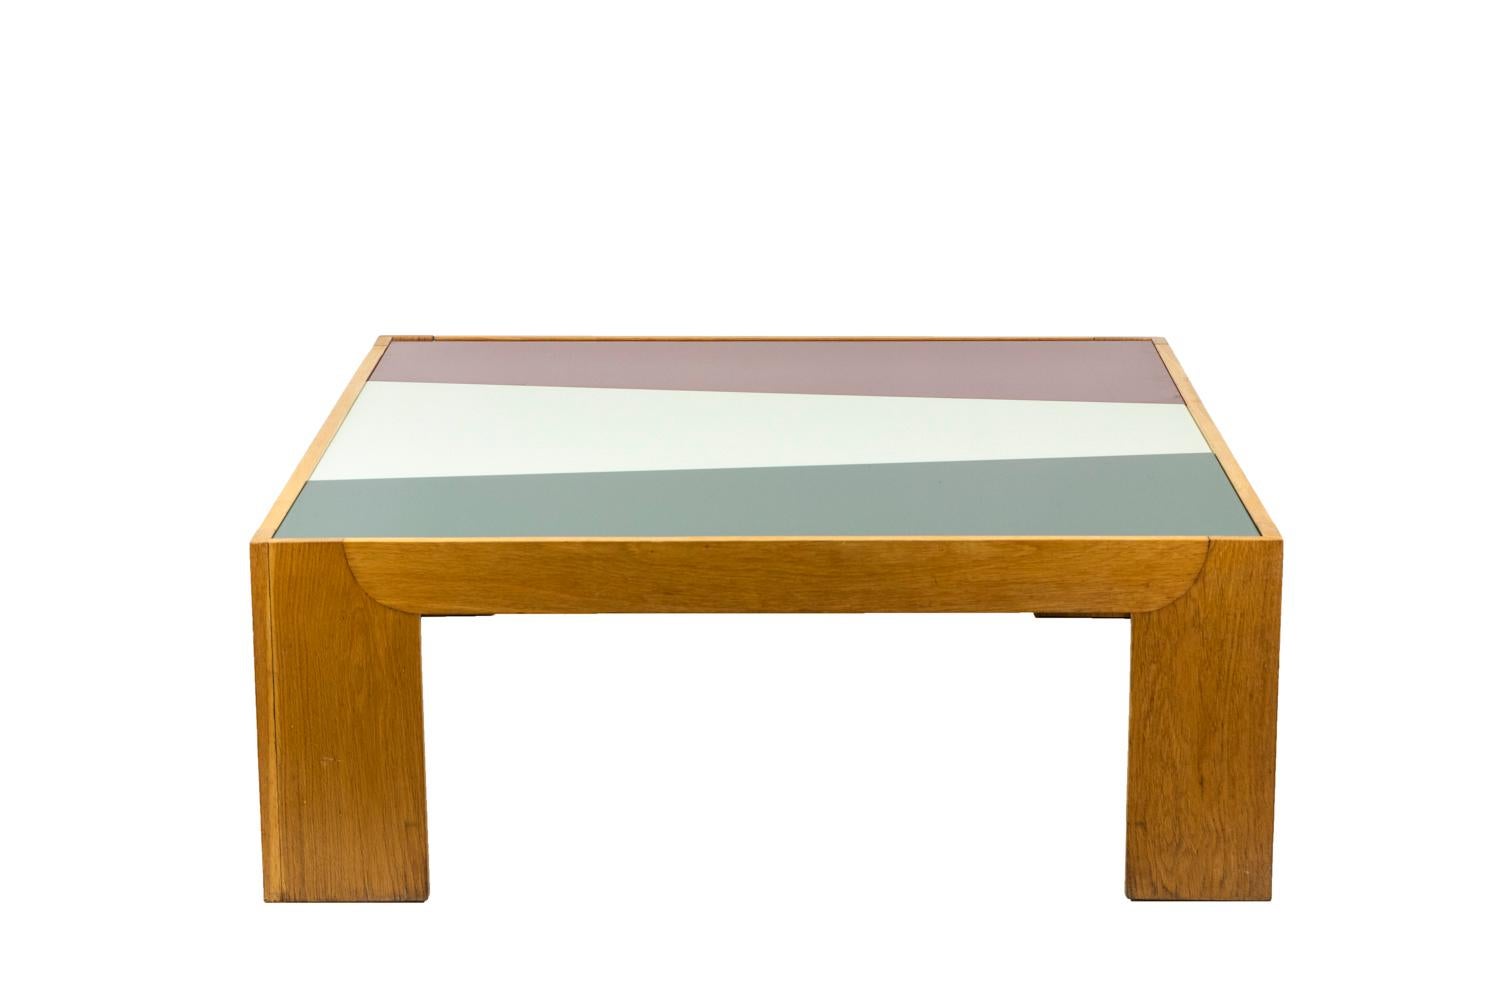 European Coffee Table in Oak and Tray in Colored Glass, 1970’s